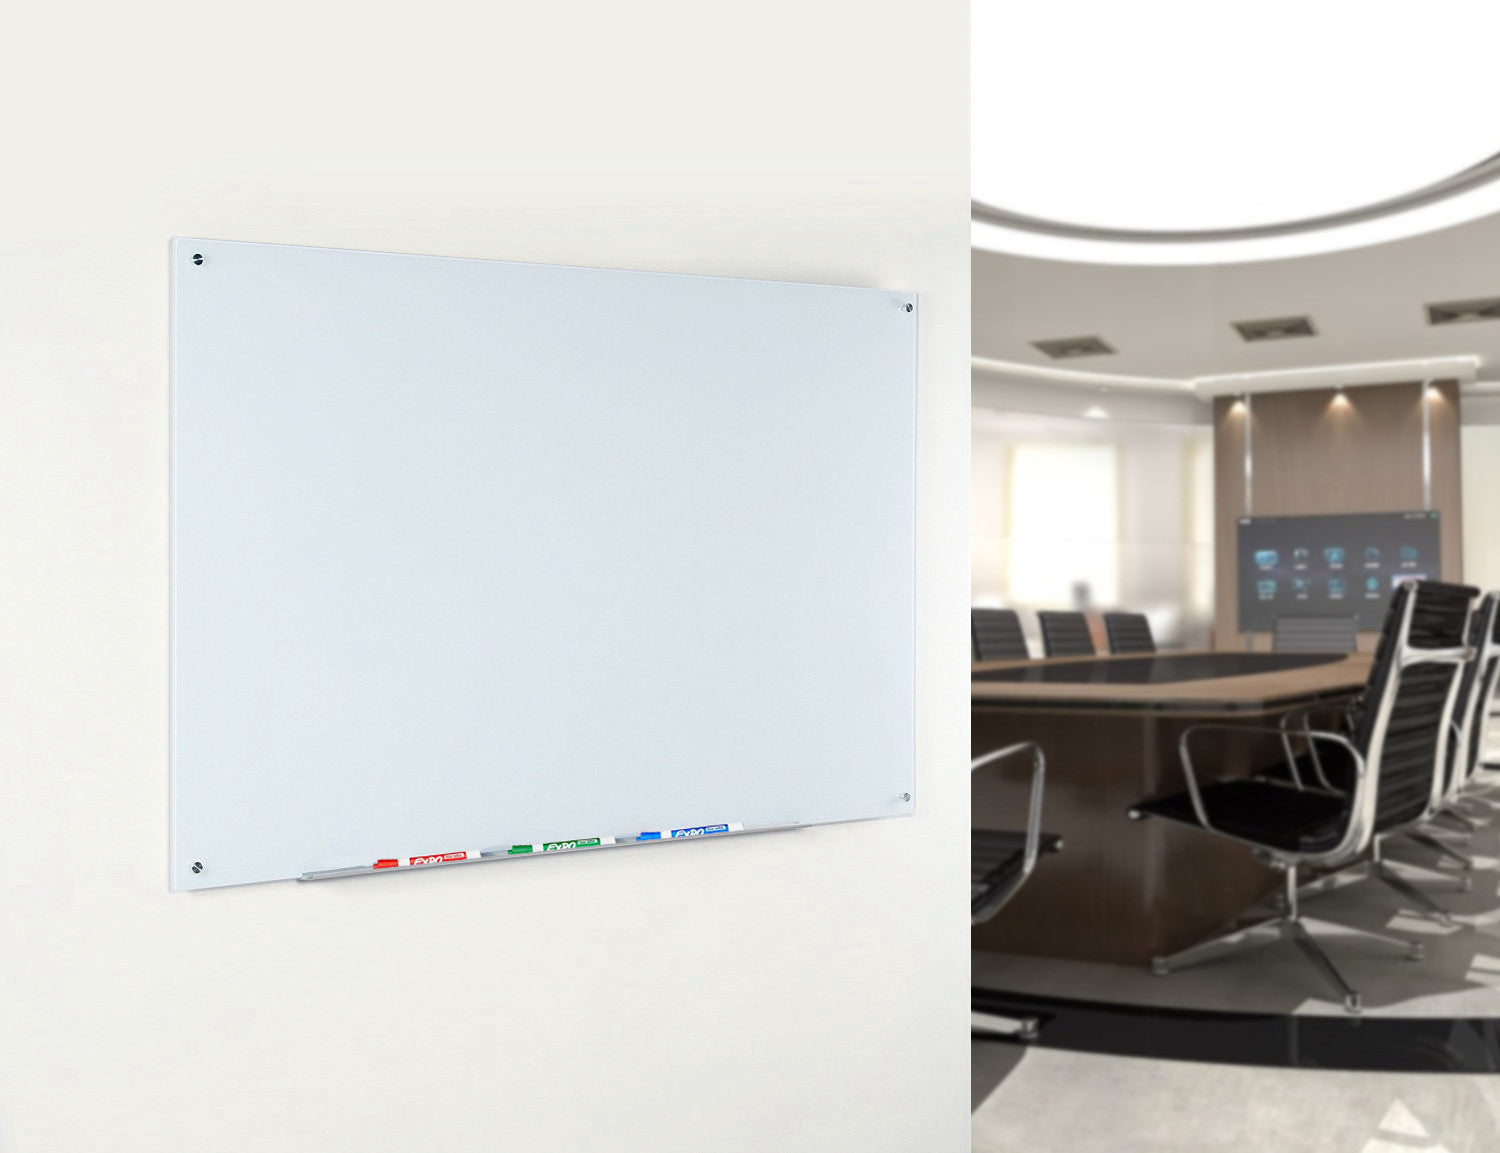 Magnetic Whiteboard Wall Dry-Erase Wall Paneling - WhiteWall®